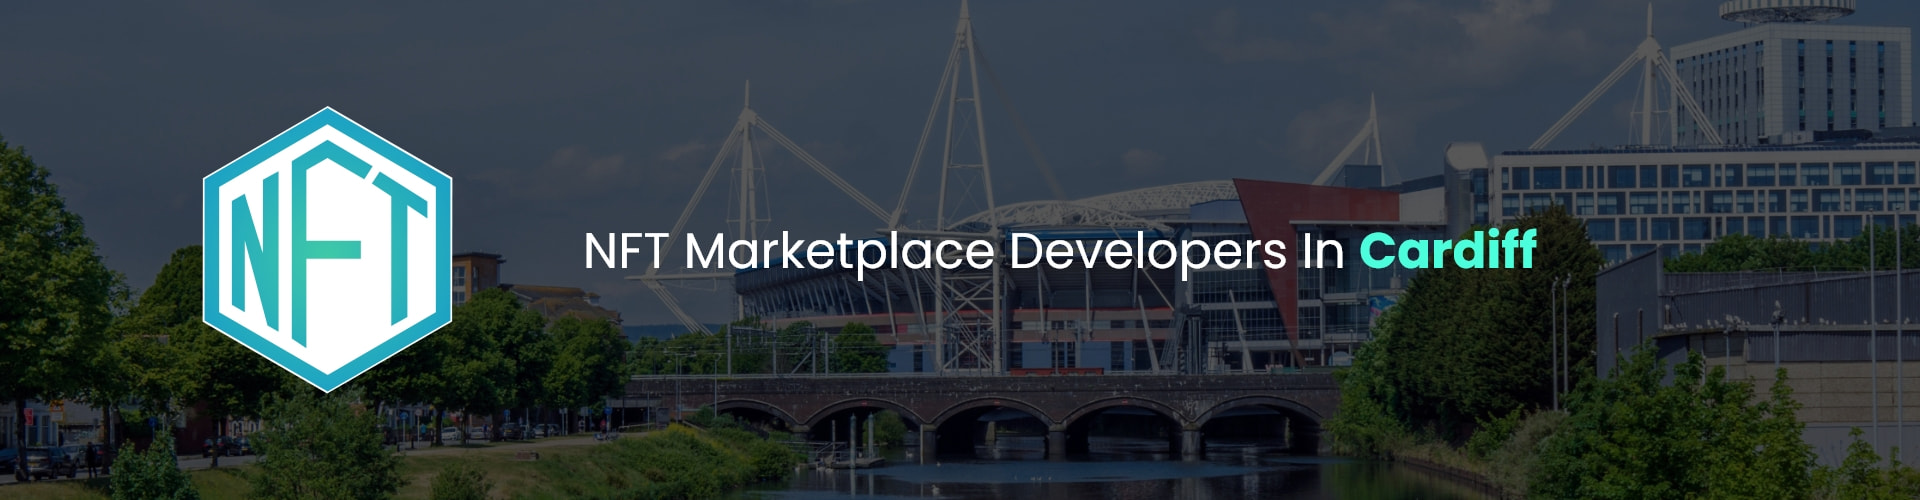 hire nft marketplace developers in cardiff